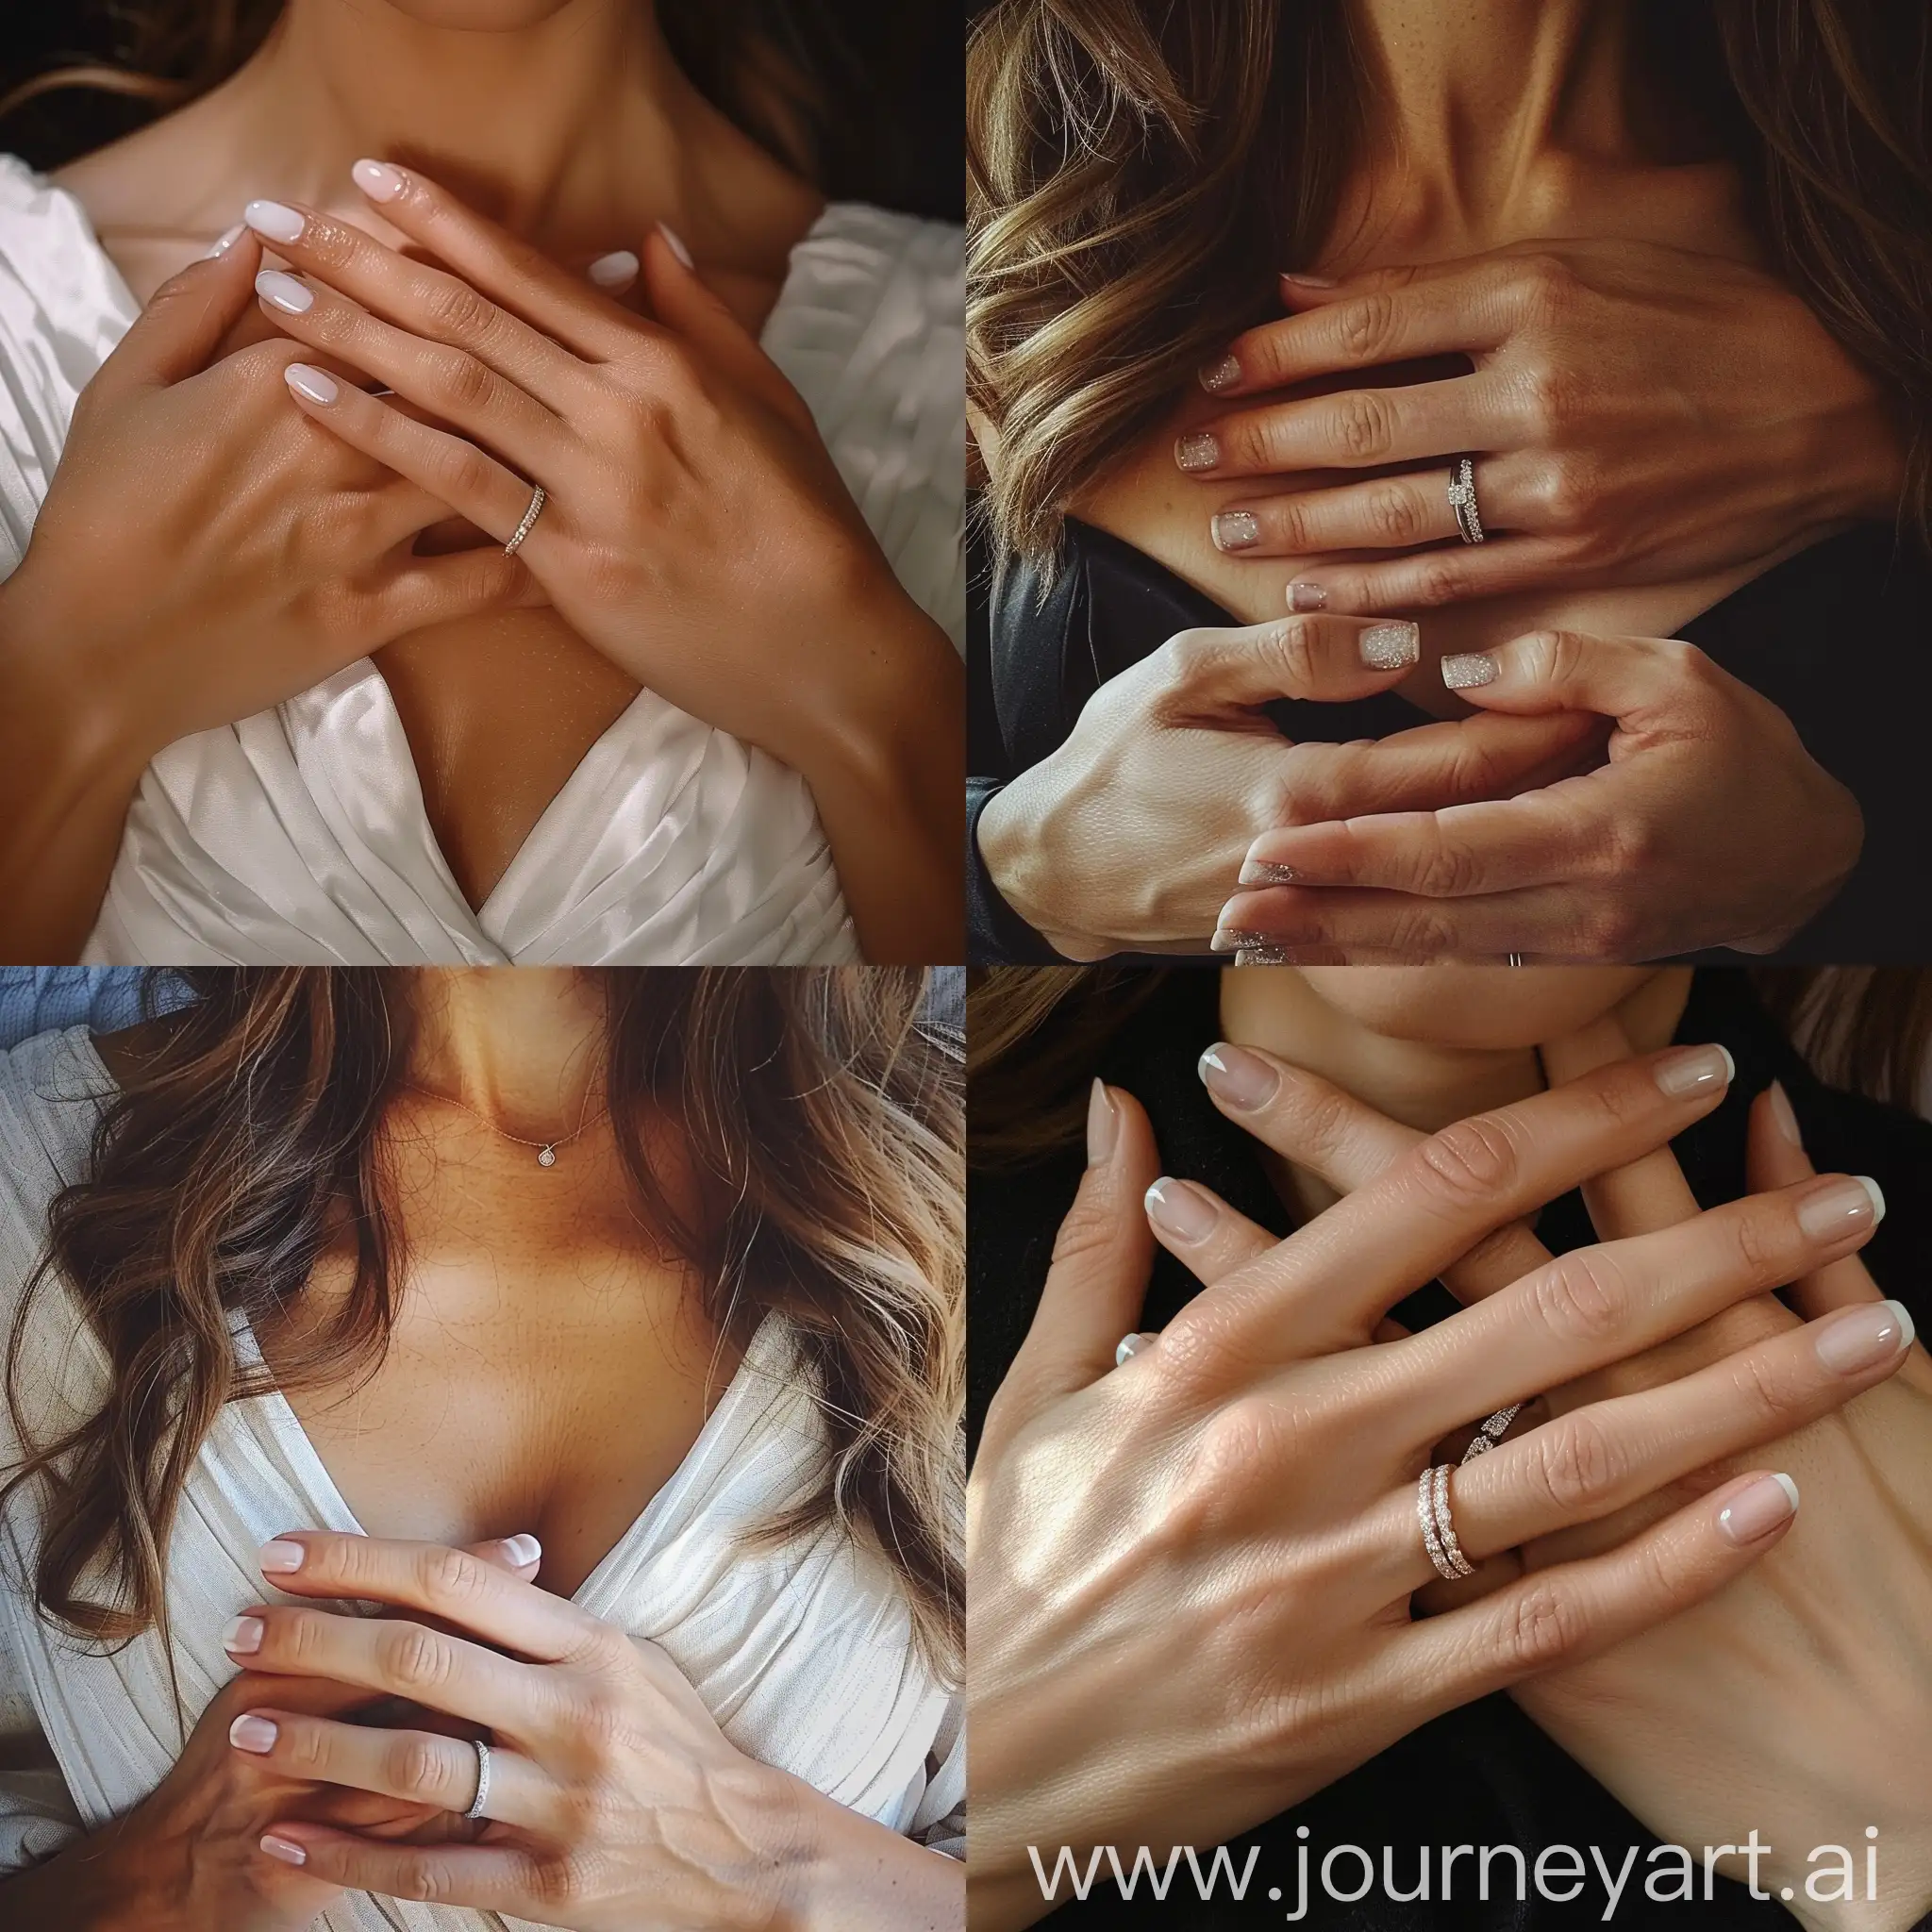 Instagram photo: Woman's hands resting atop her chest, beautiful hands, perfect nails, wedding ring